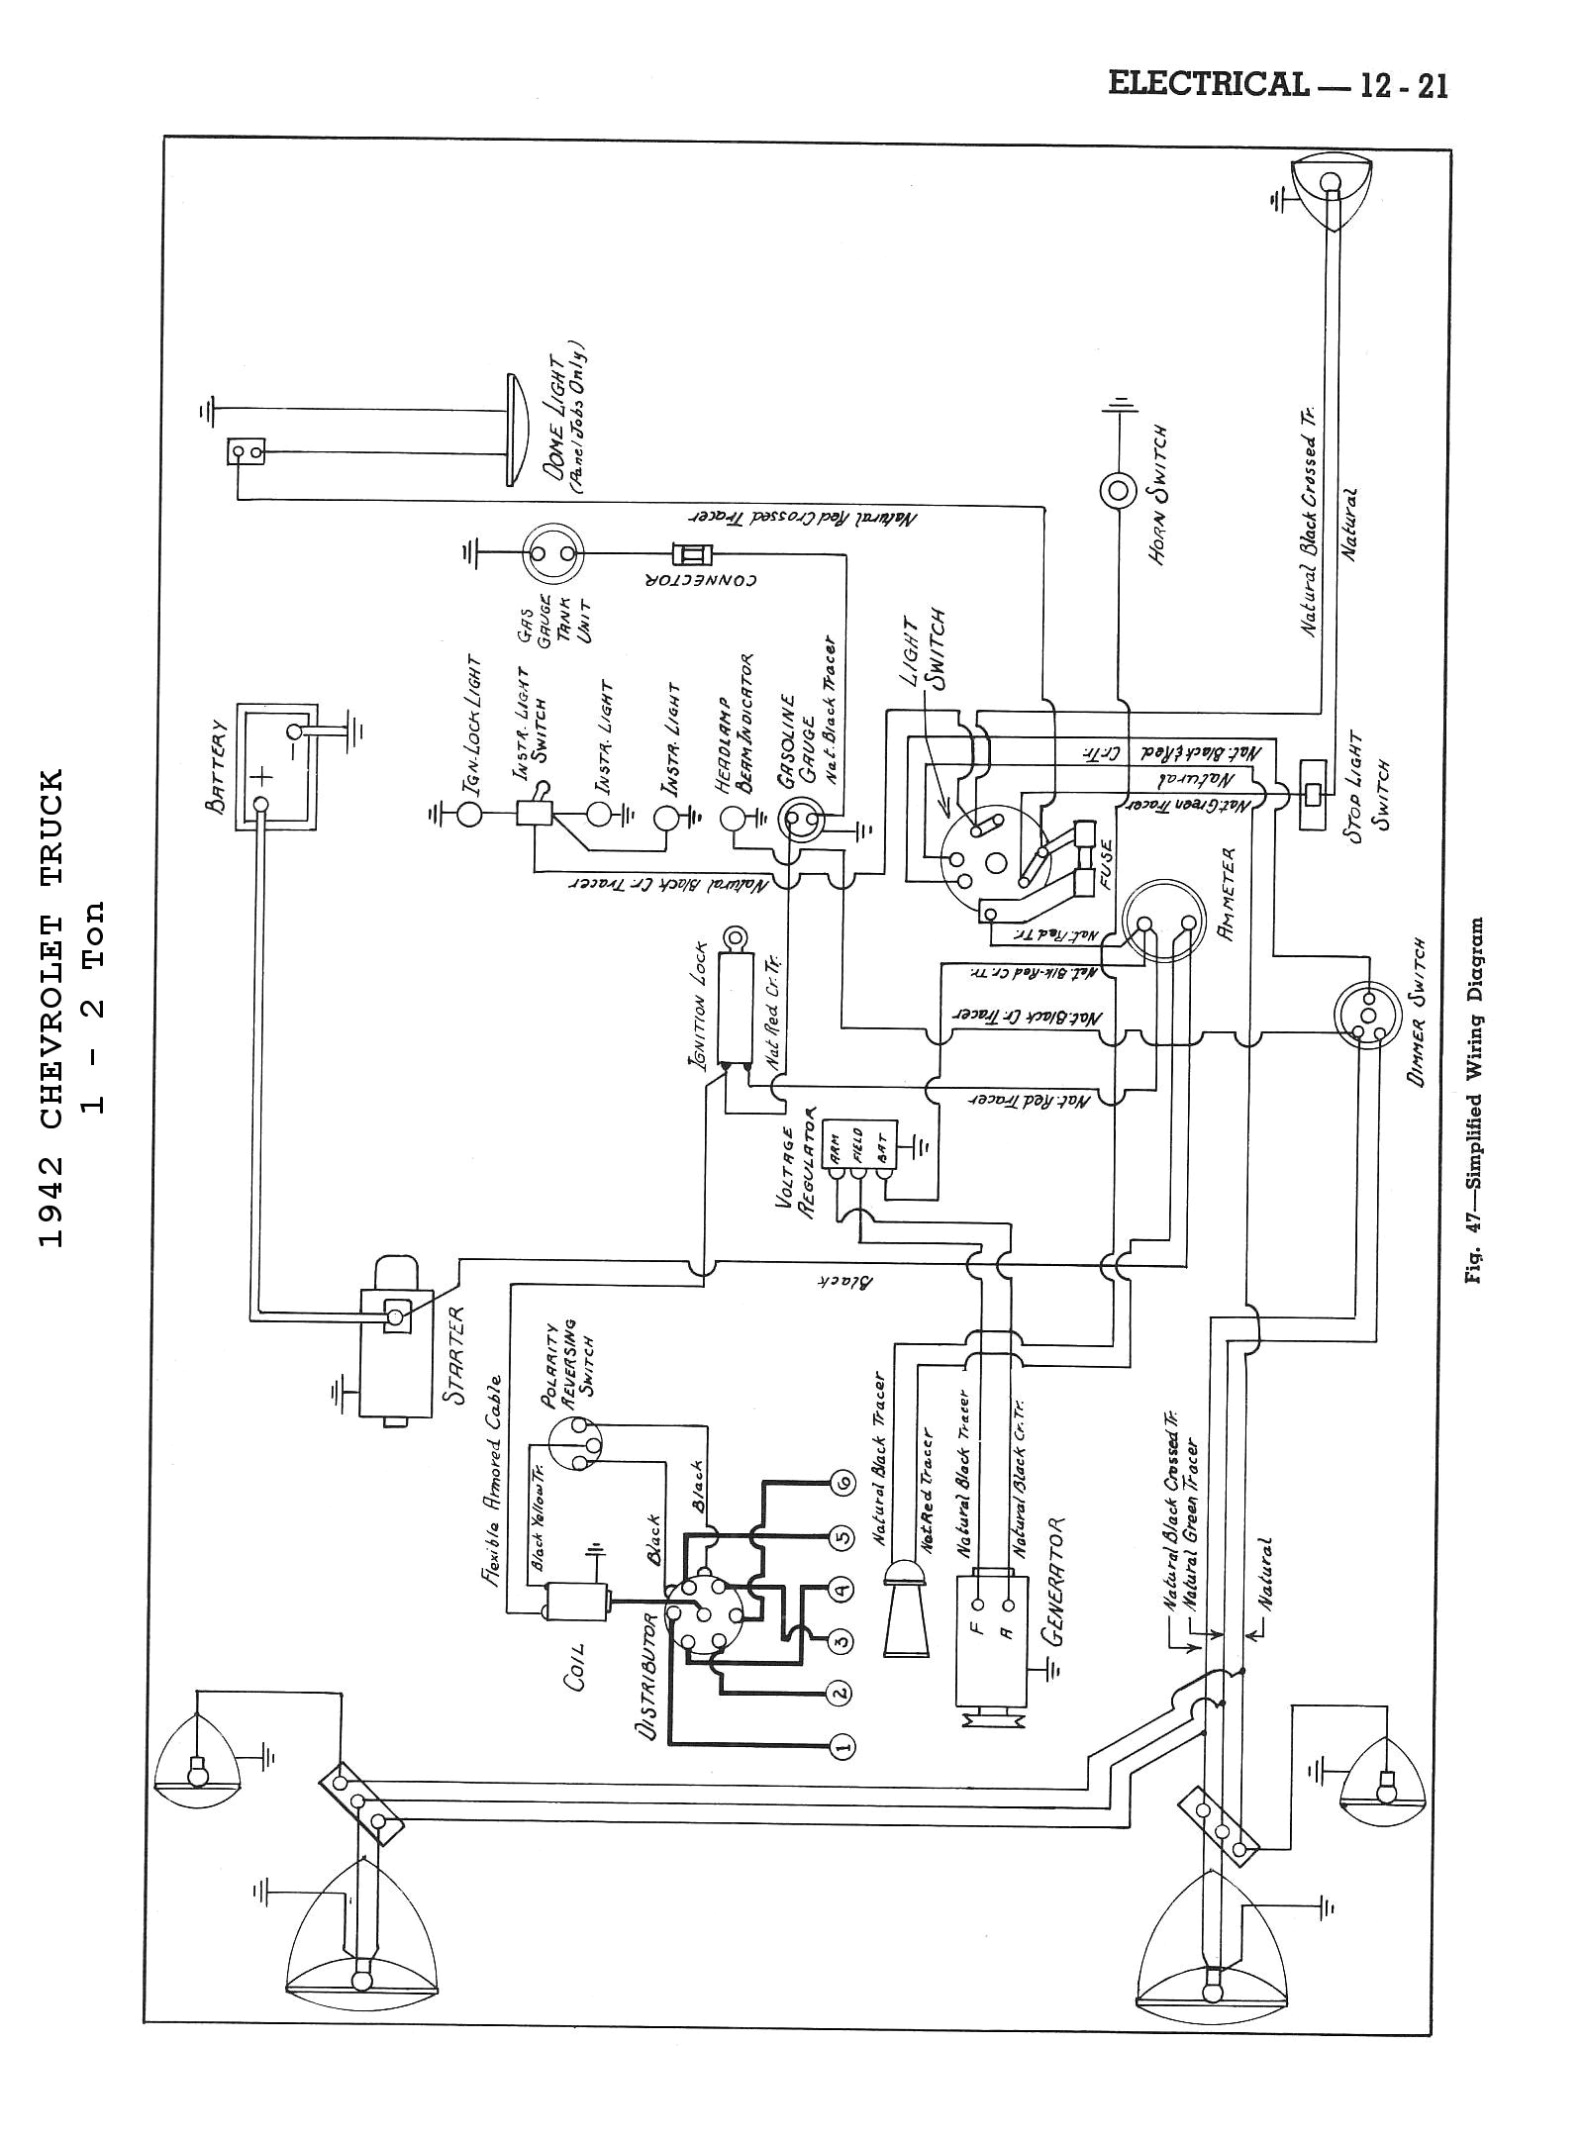 periodic table yellow best of series circuit diagram turn signal wiring diagram lovely jcb 3 0d